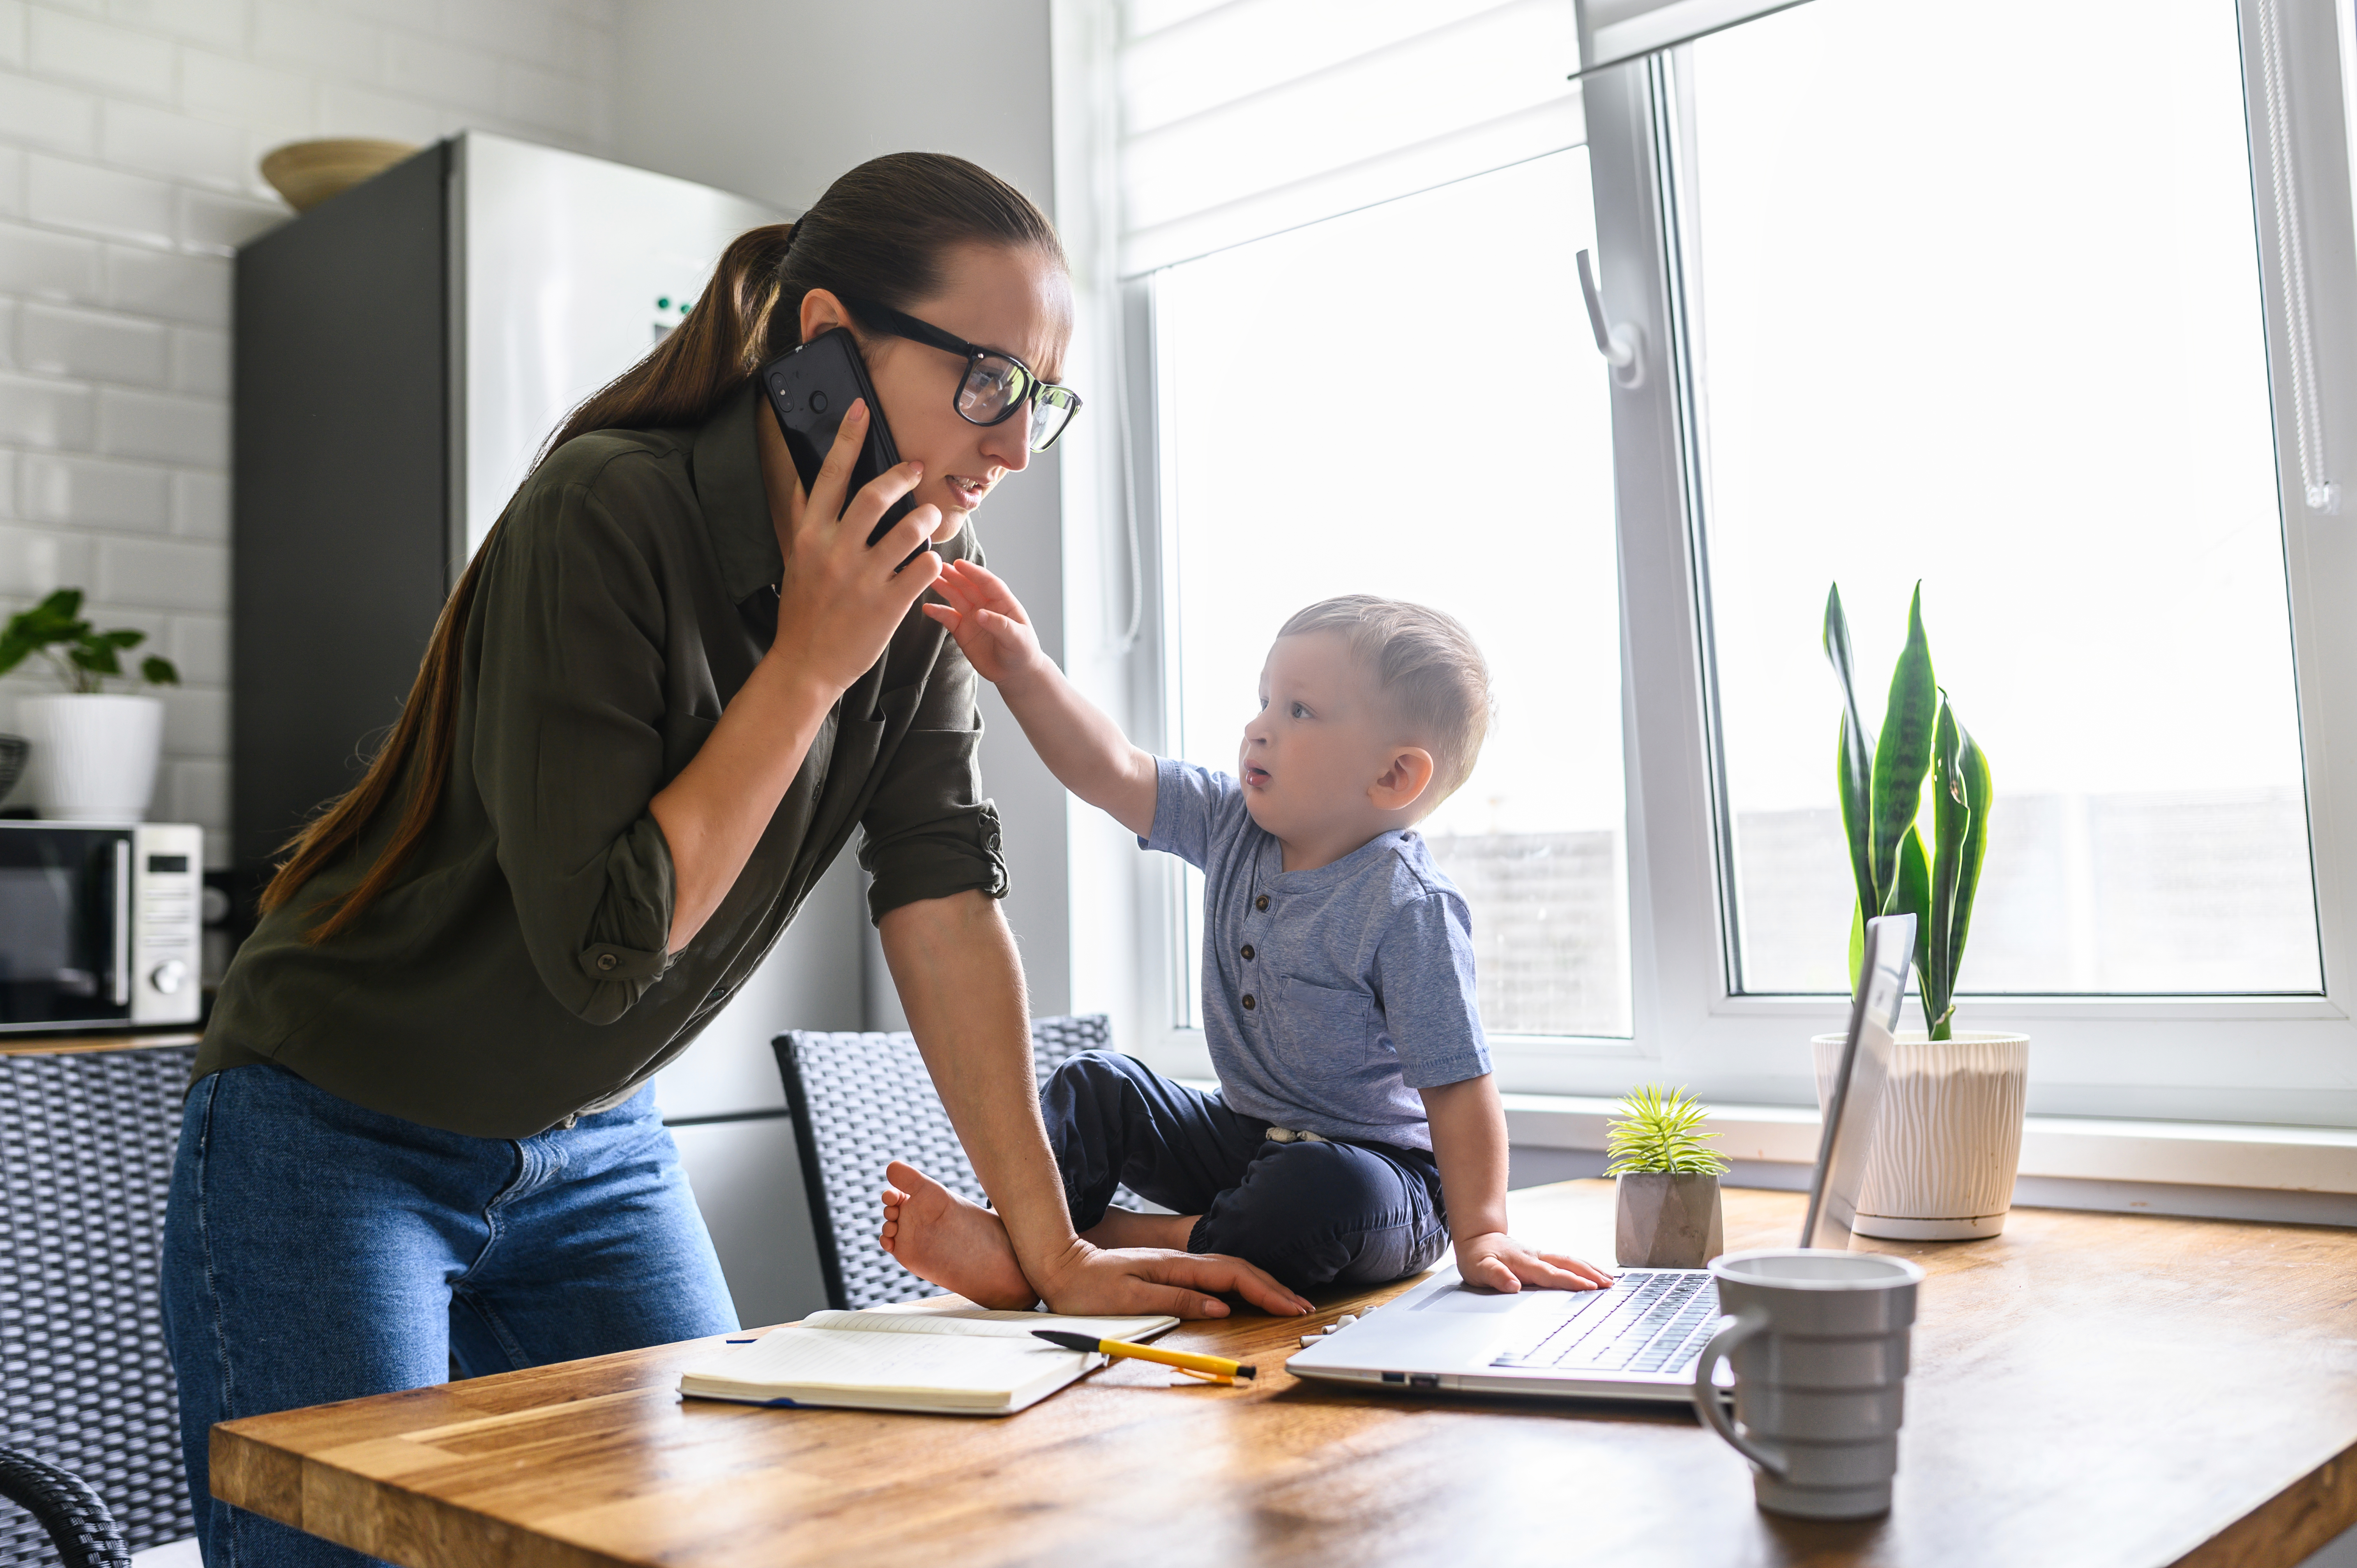 A woman on  the phone while with her child | Source: Shutterstock